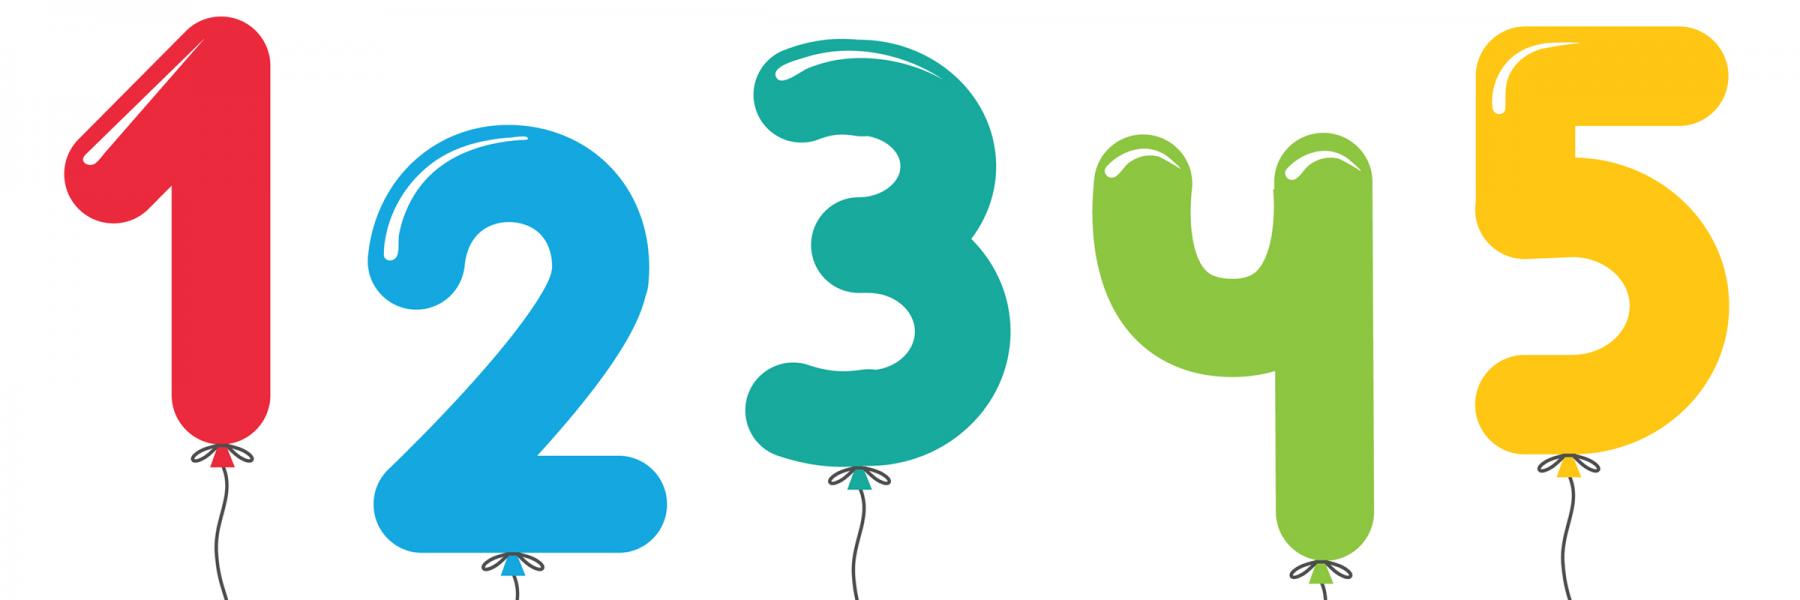 Balloons shaped like the numbers, 1, 2, 3, 4, and 5.